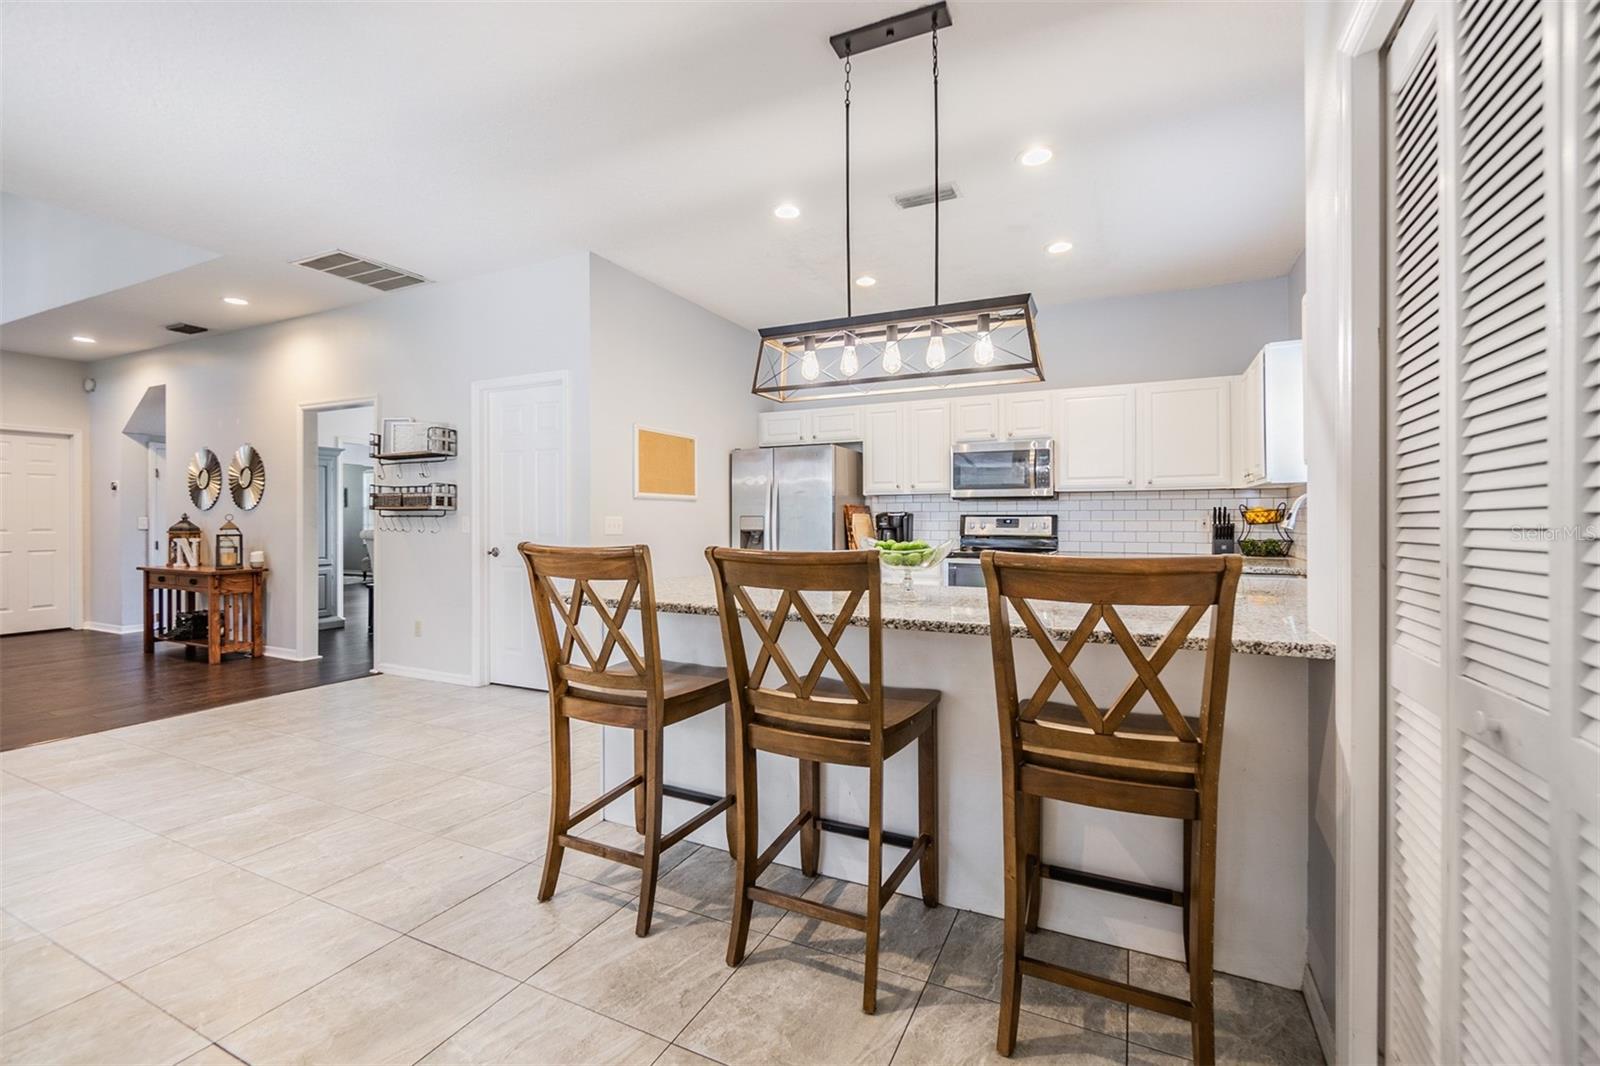 Large and Open kitchen with new light fixture, bar area, Granite Countertops, and Stainless Steel appliances.